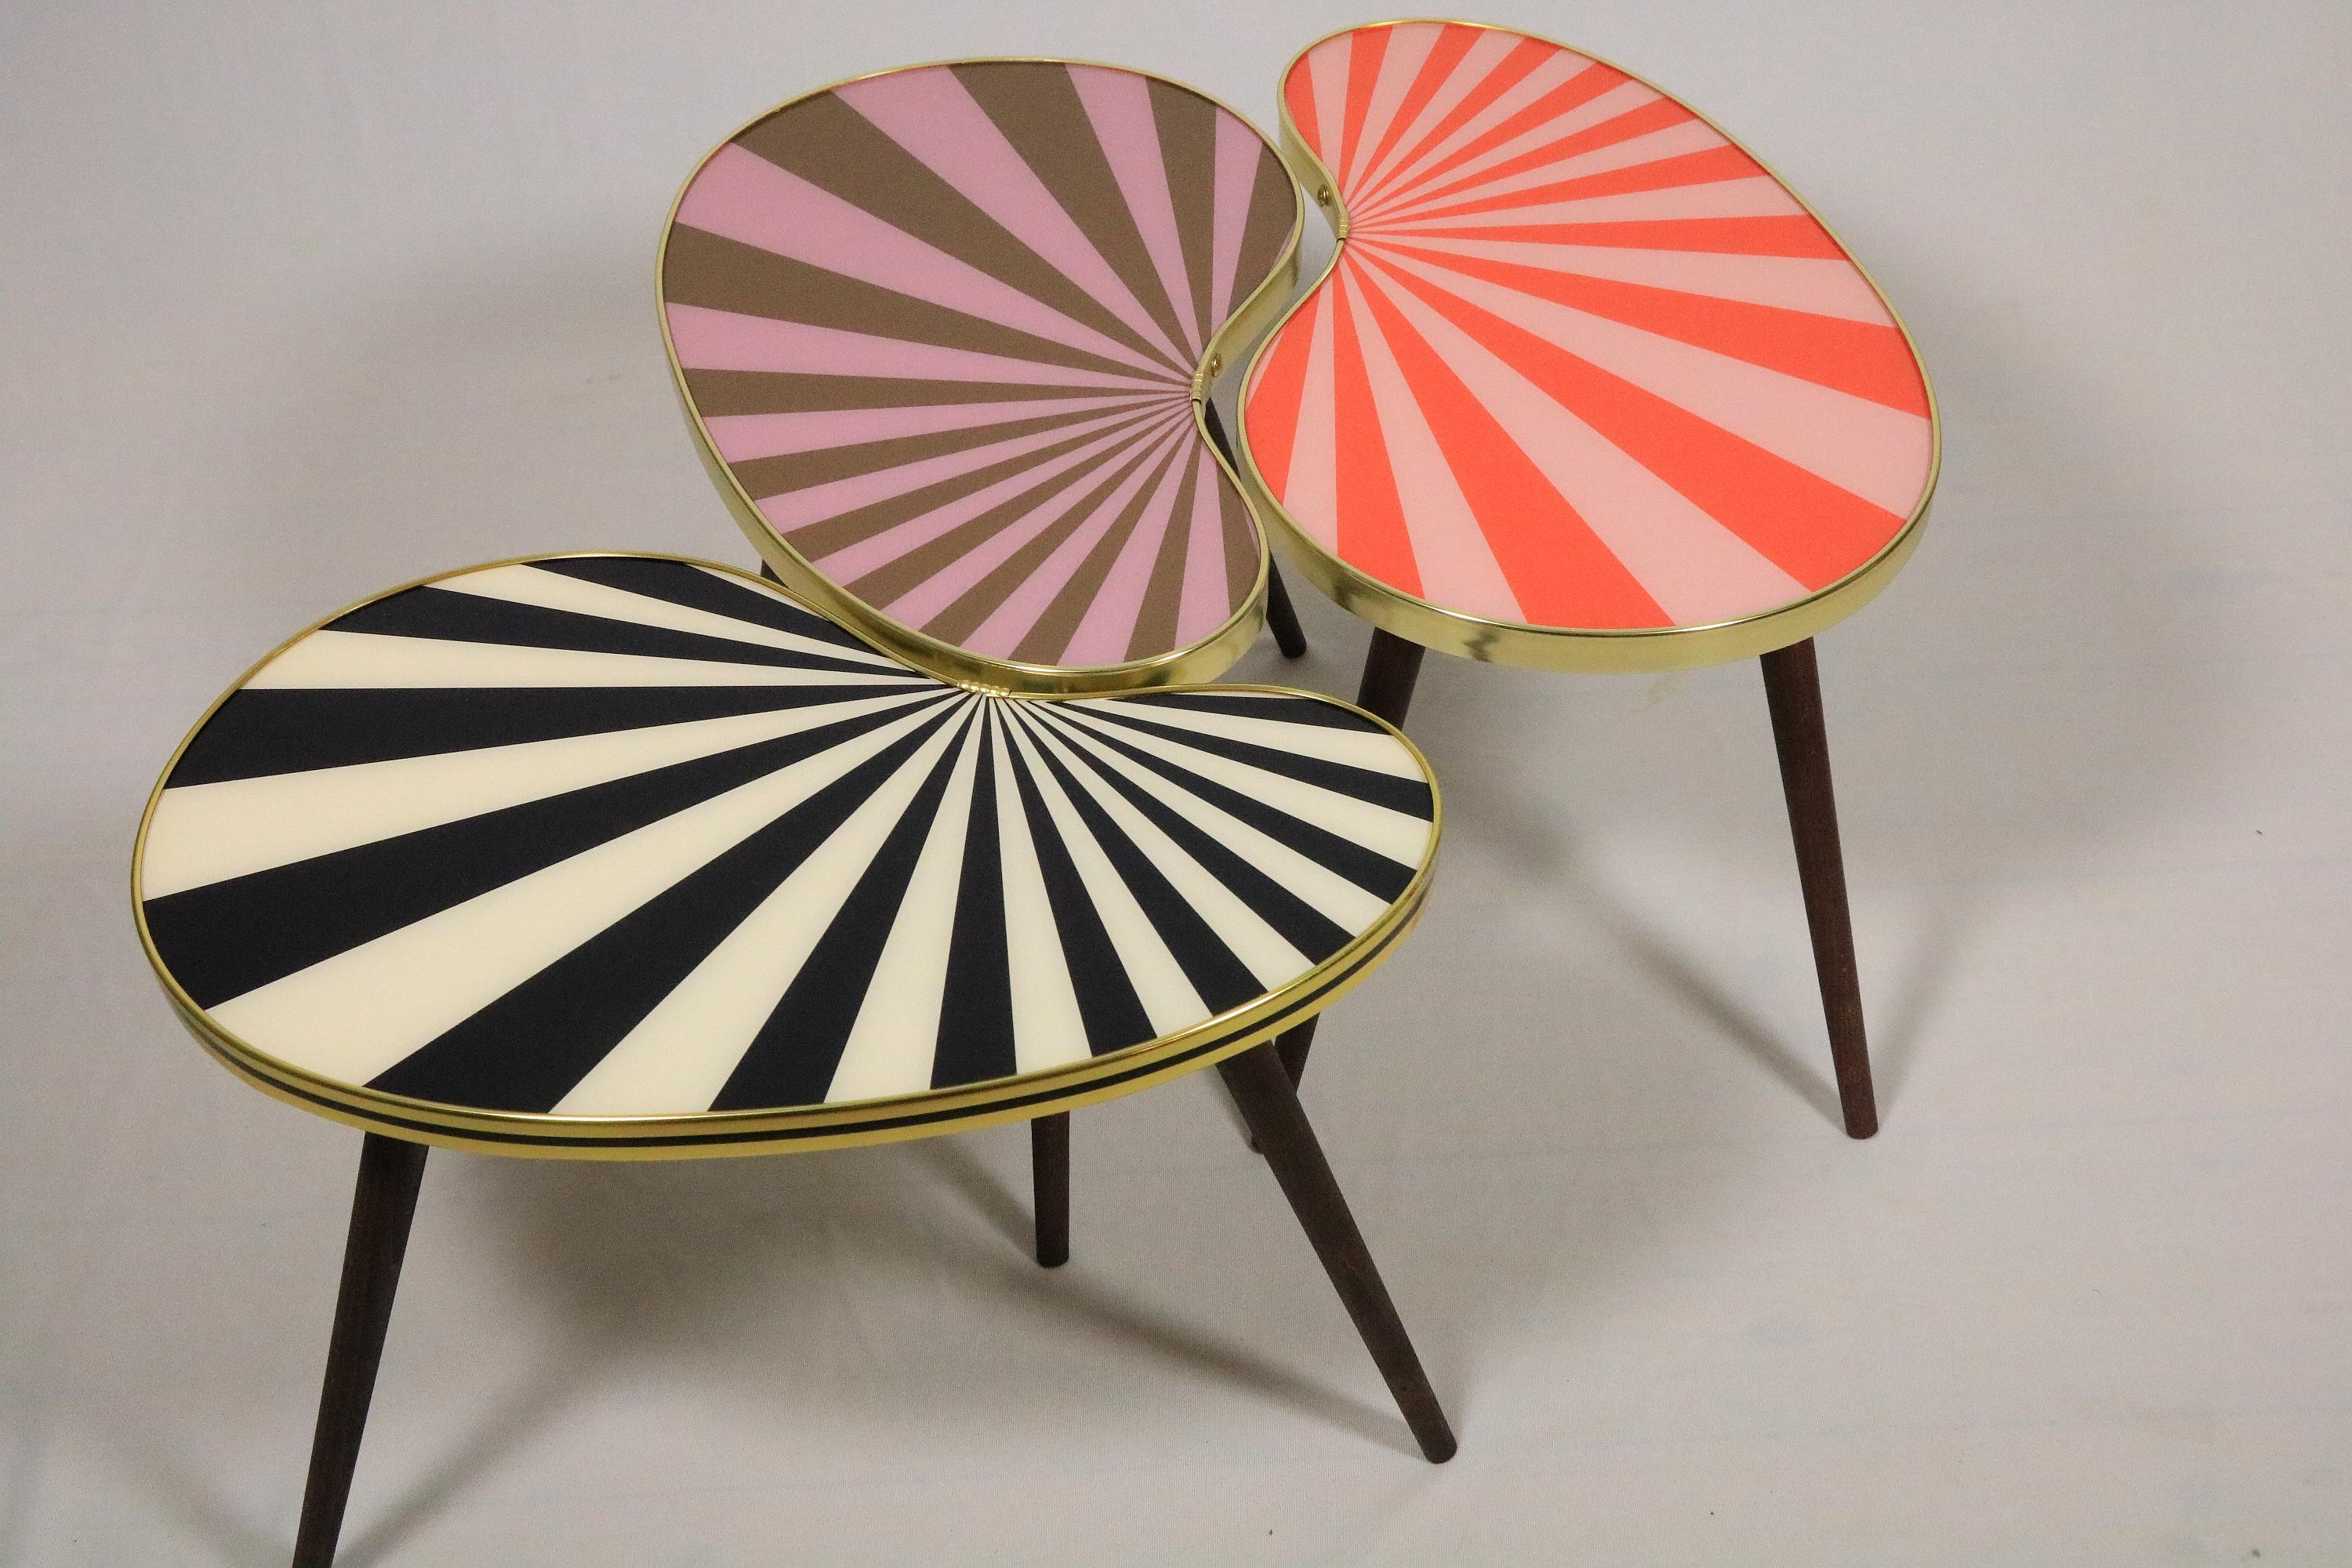 Small Side Table, Kidney Shaped, Black-White Stripes, 3 Elegant Legs, 50s Style In New Condition For Sale In Berlin, BE